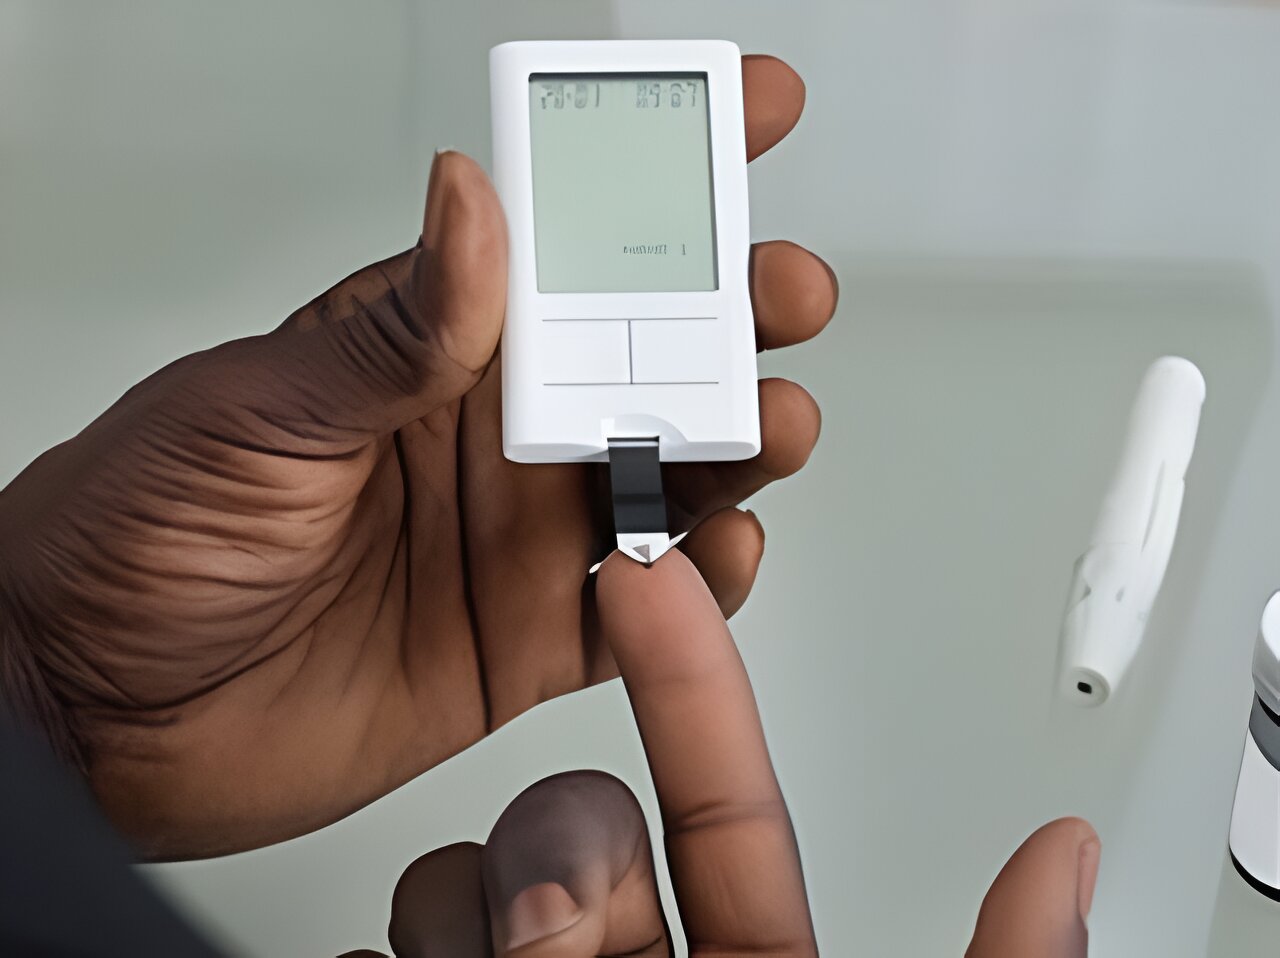 Mobile health-delivered coaching cuts blood glucose levels in patients with diabetes: Study